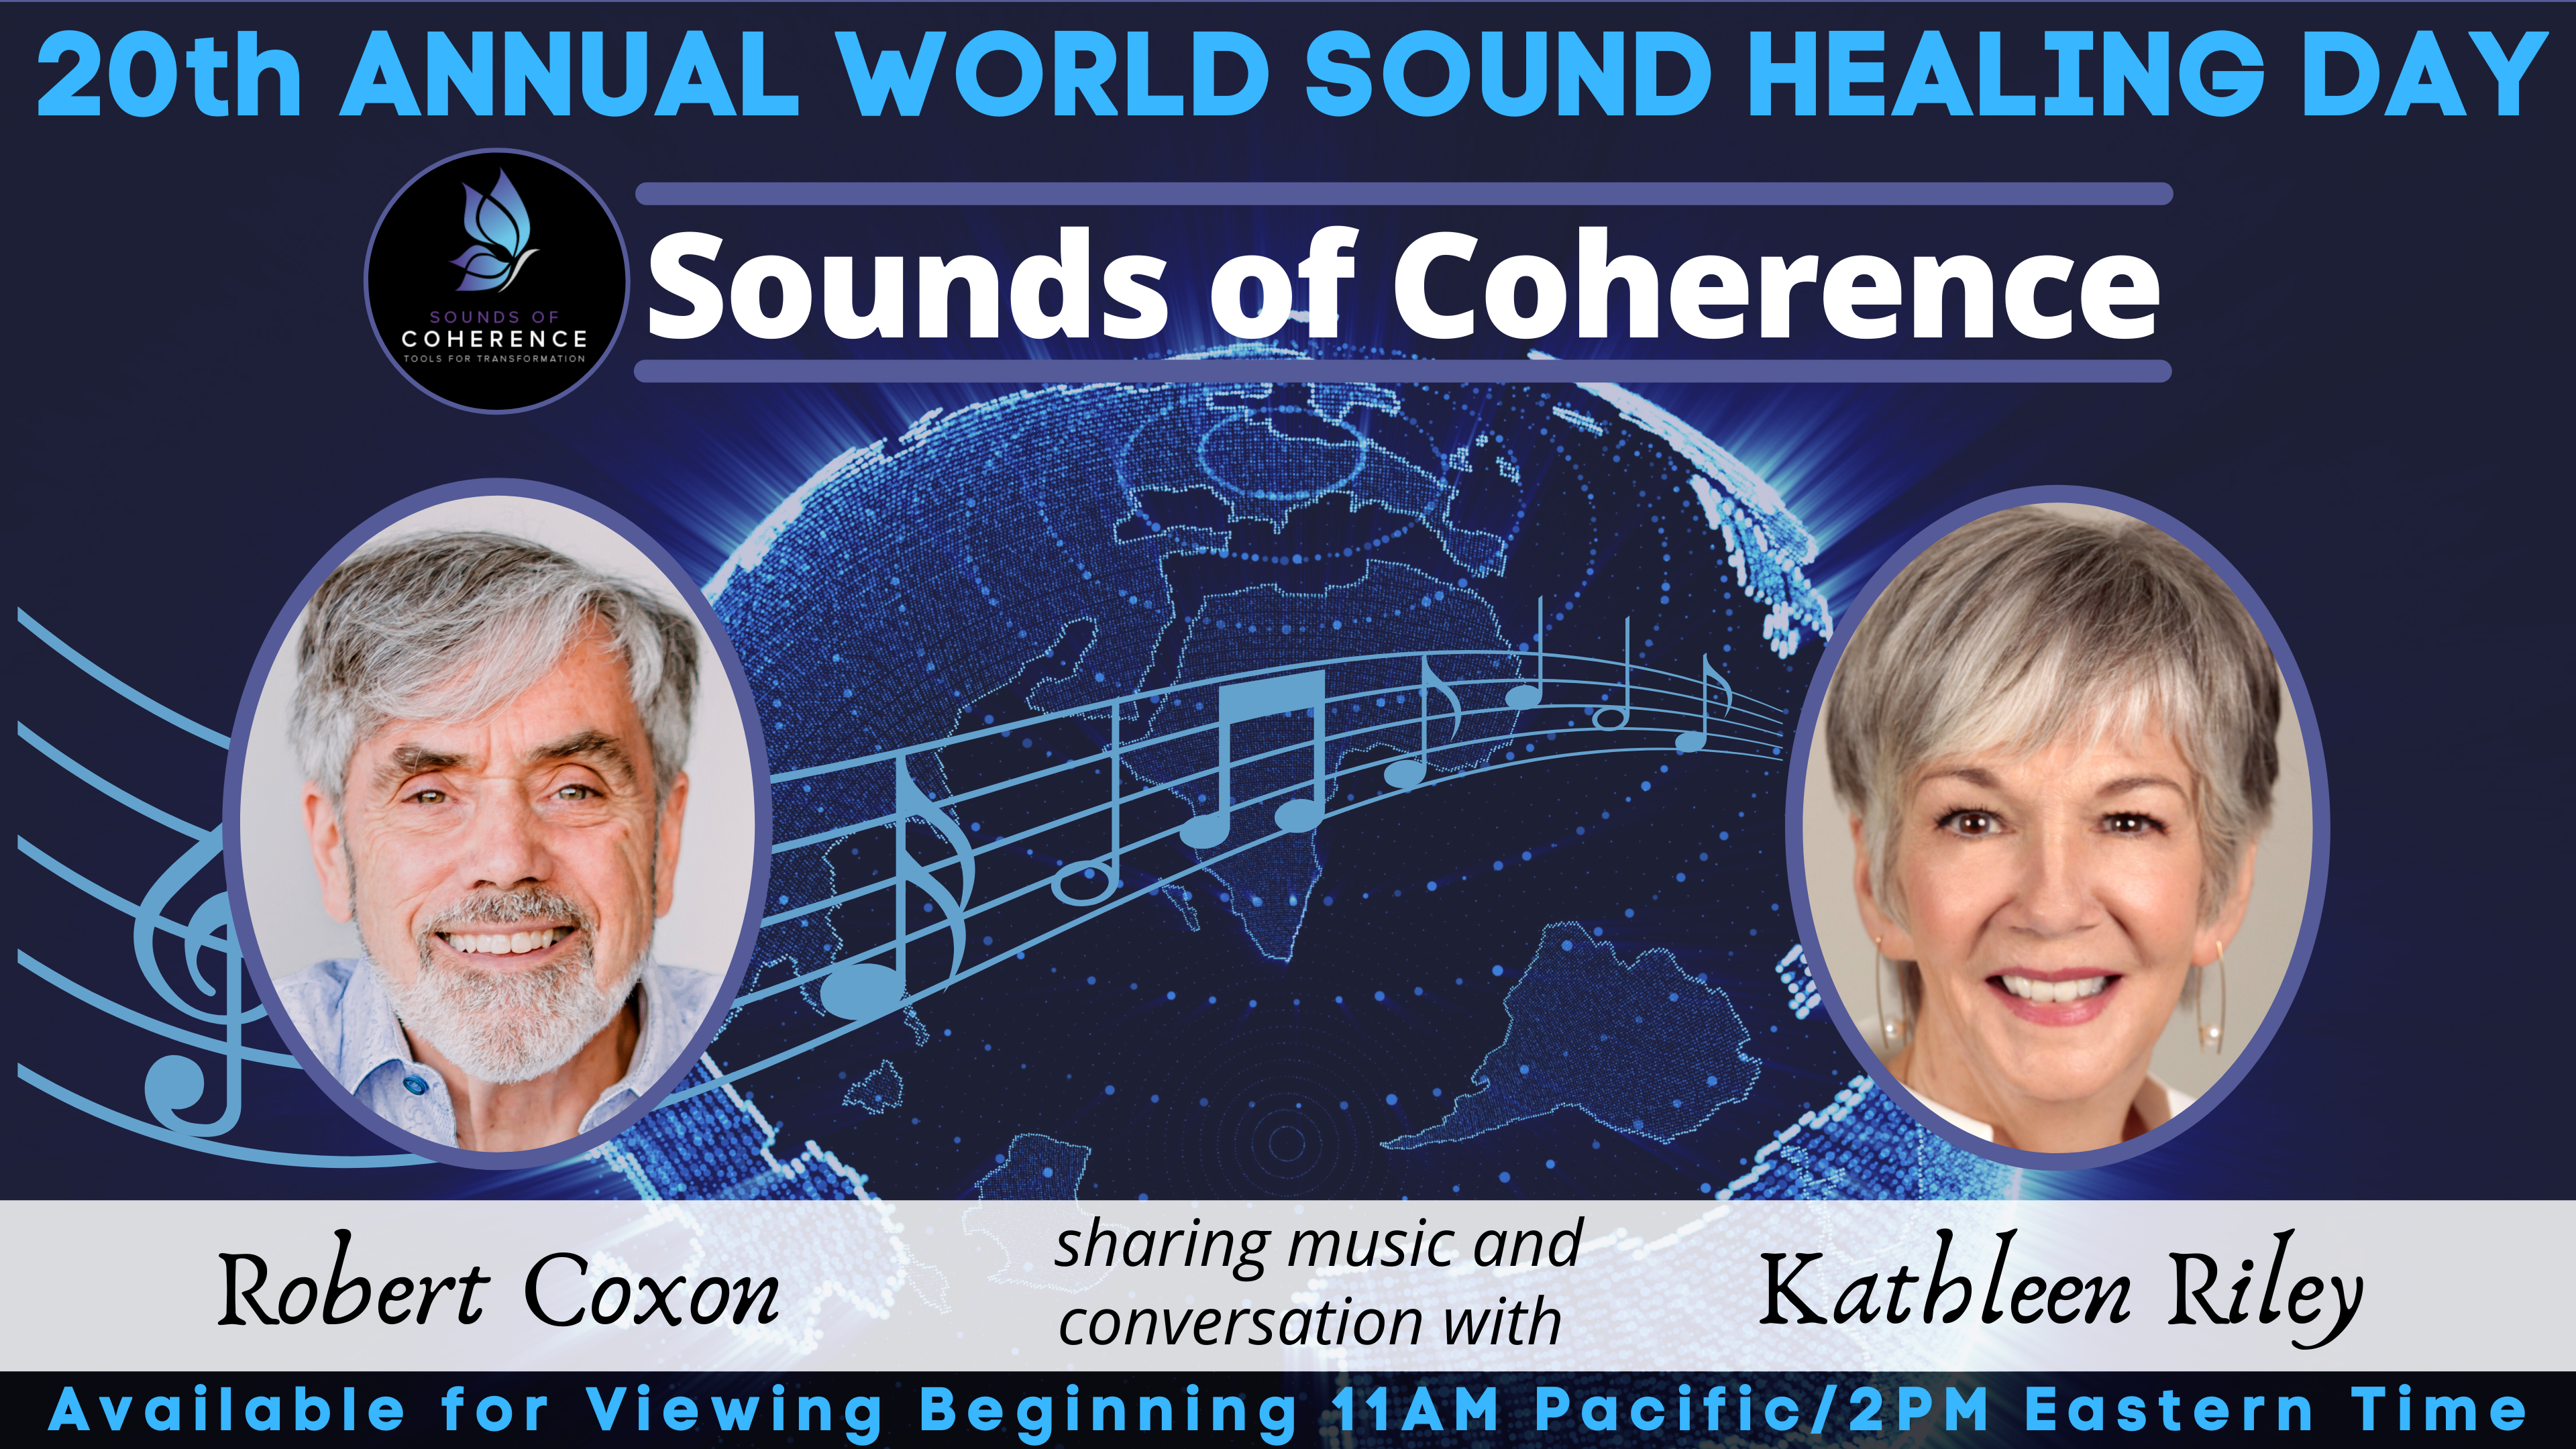 Sounds of Coherence: Robert Coxon Sharing Music and Conversation with Kathleen Riley